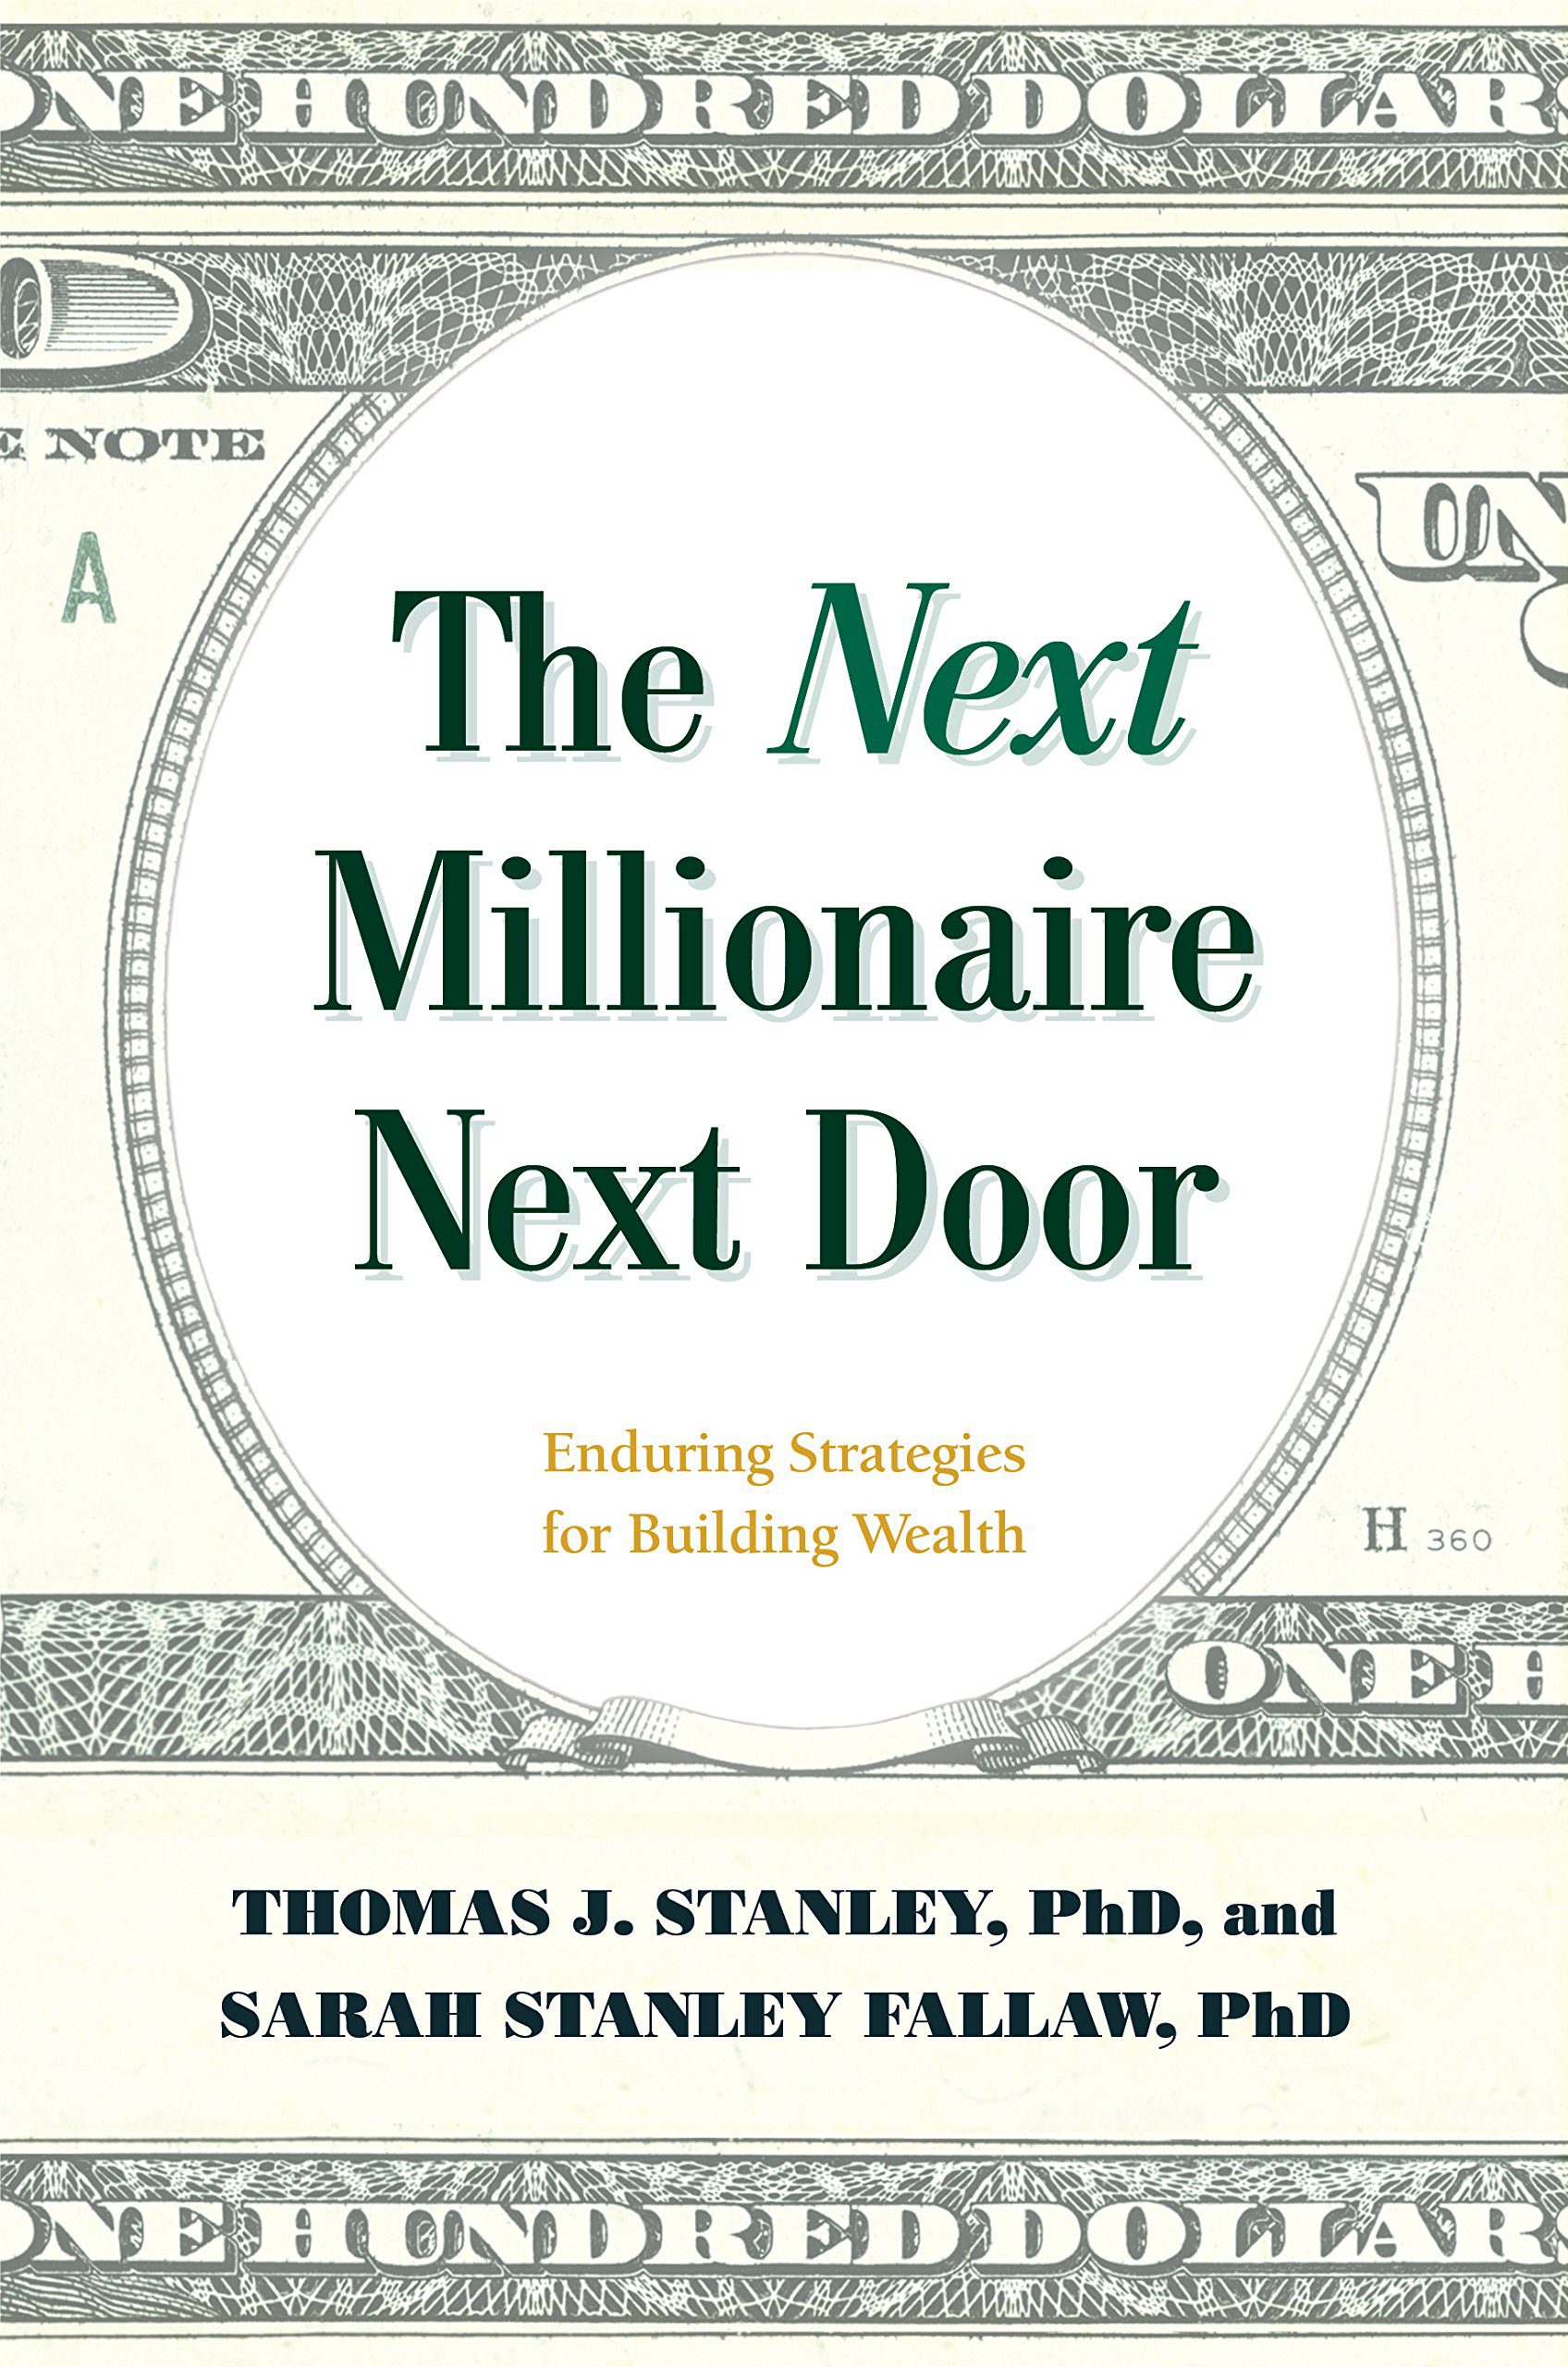 Strategies　Fallaw　Thomas　Door:　Nuria　Next　and　for　Stanley　Store　by　Millionaire　Stanley　Building　J.　Next　Wealth　Enduring　The　Sarah